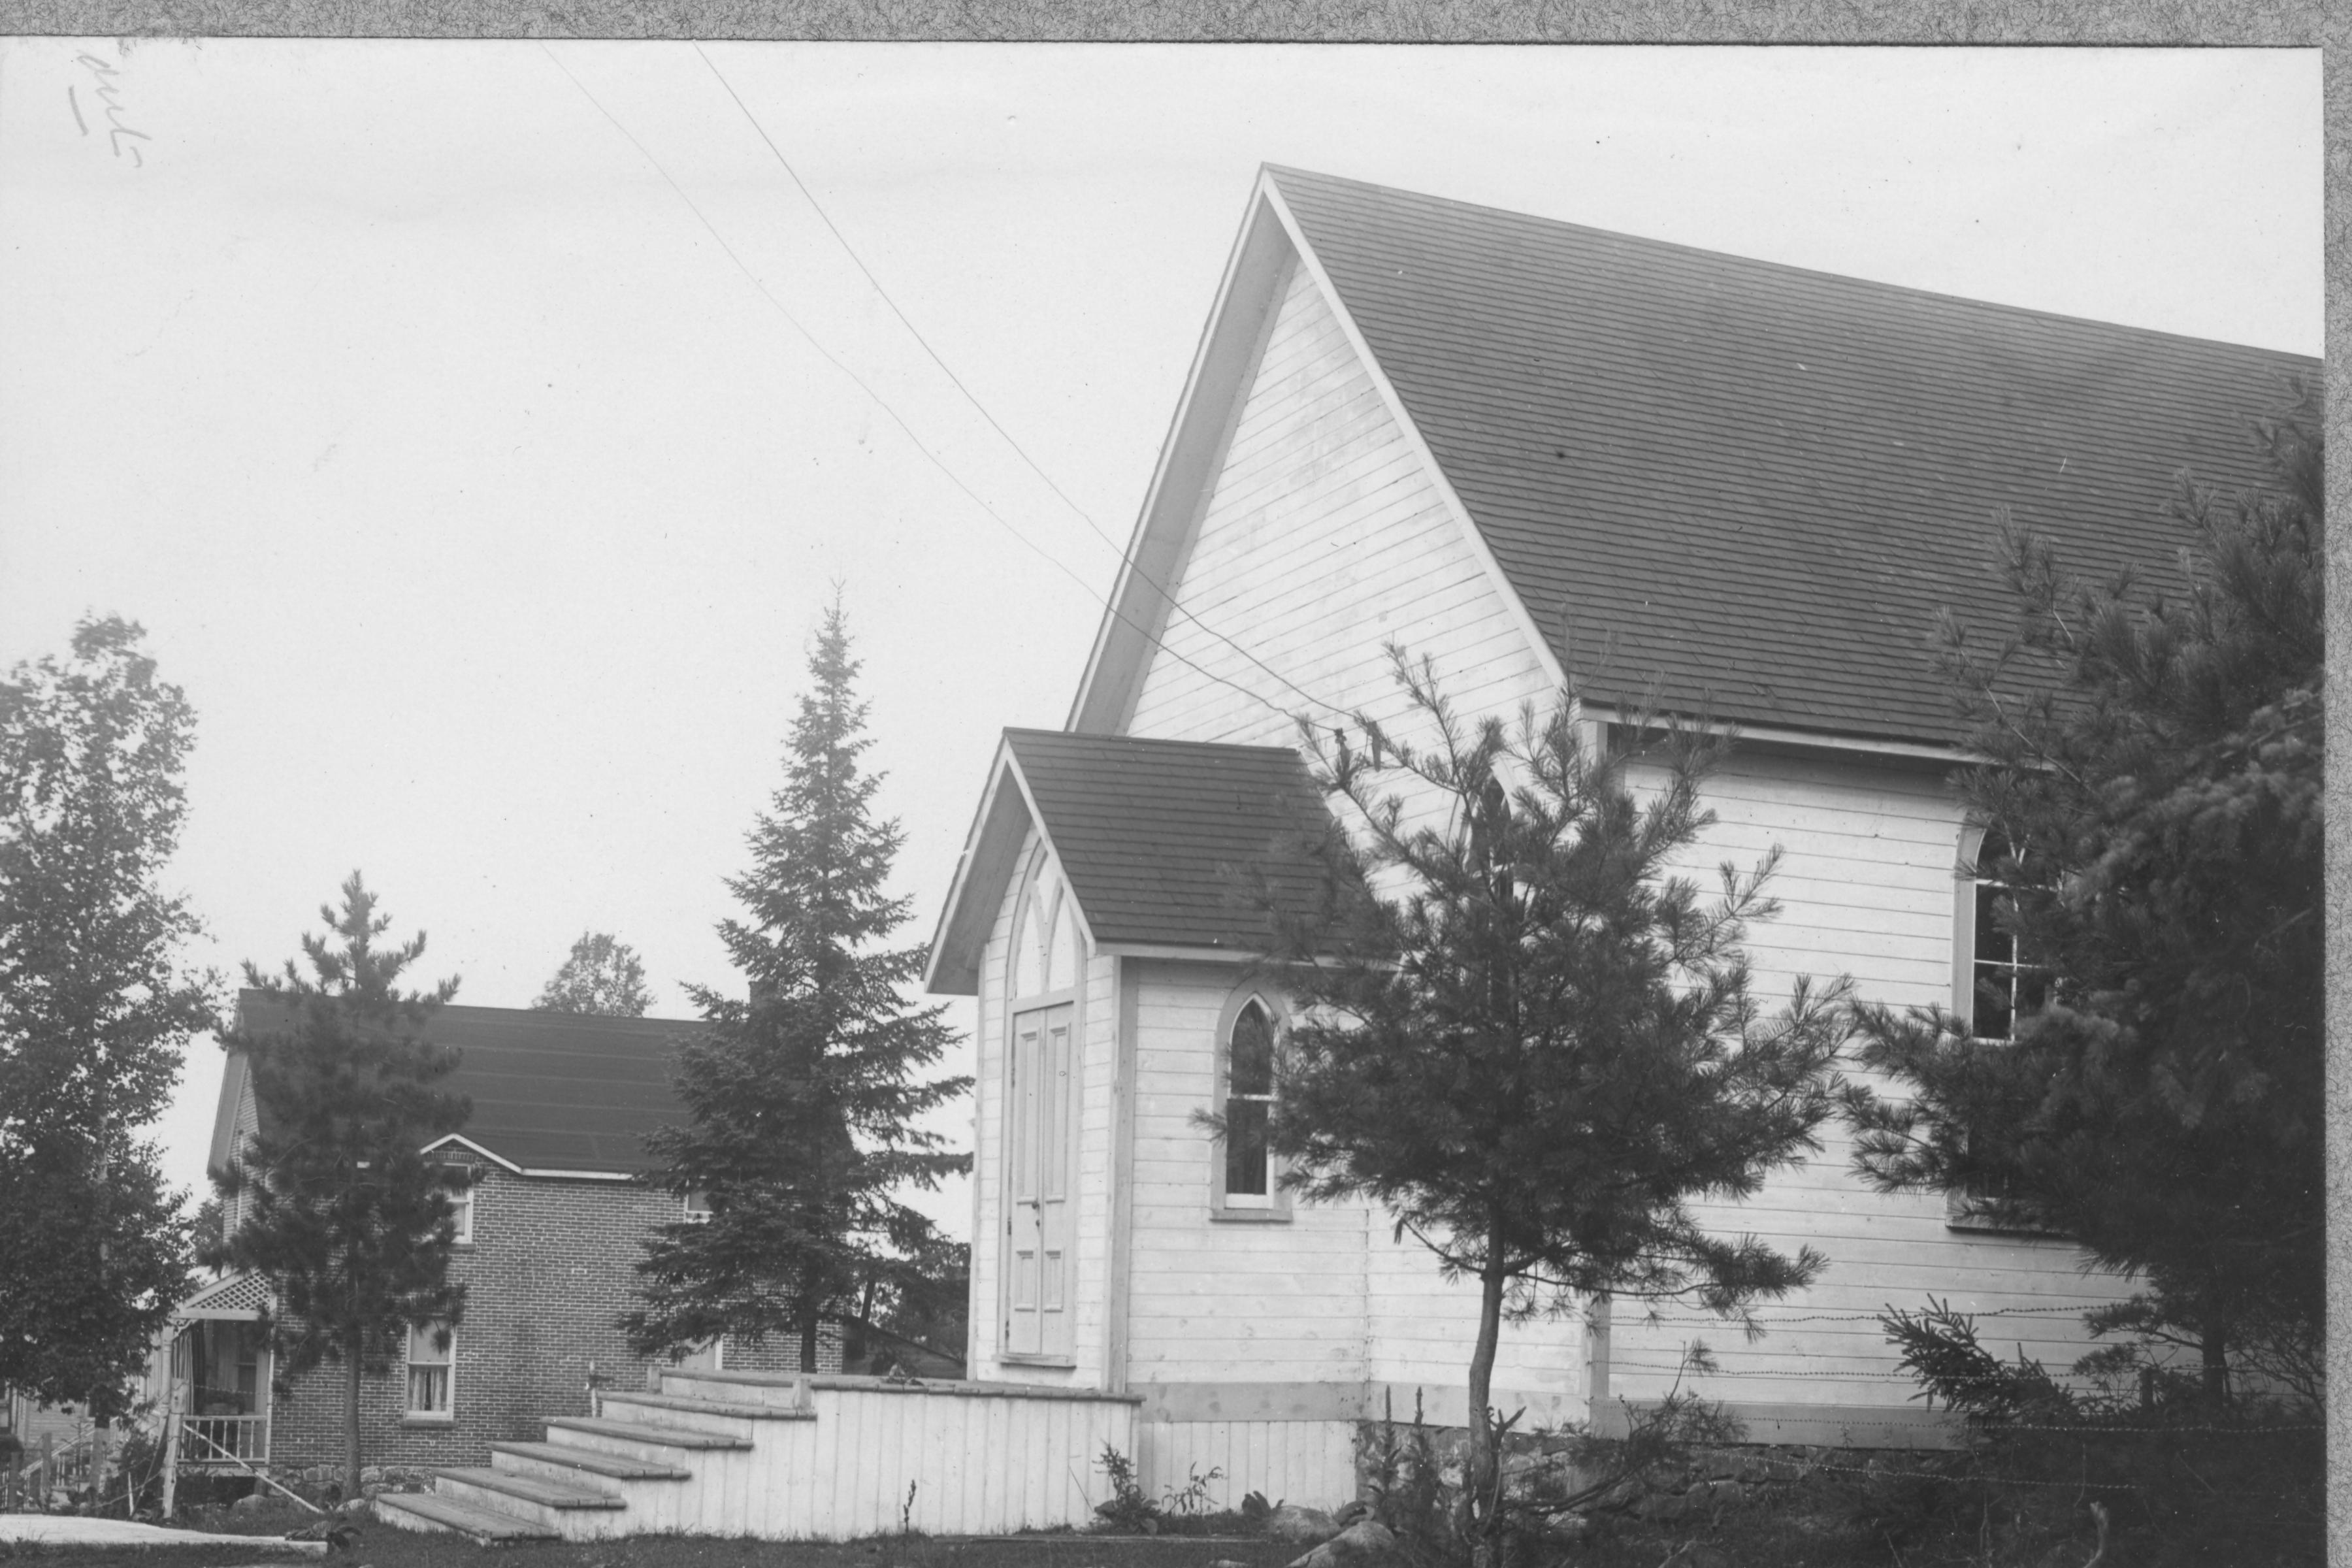 Knox United Church and manse (image taken pre-1959)